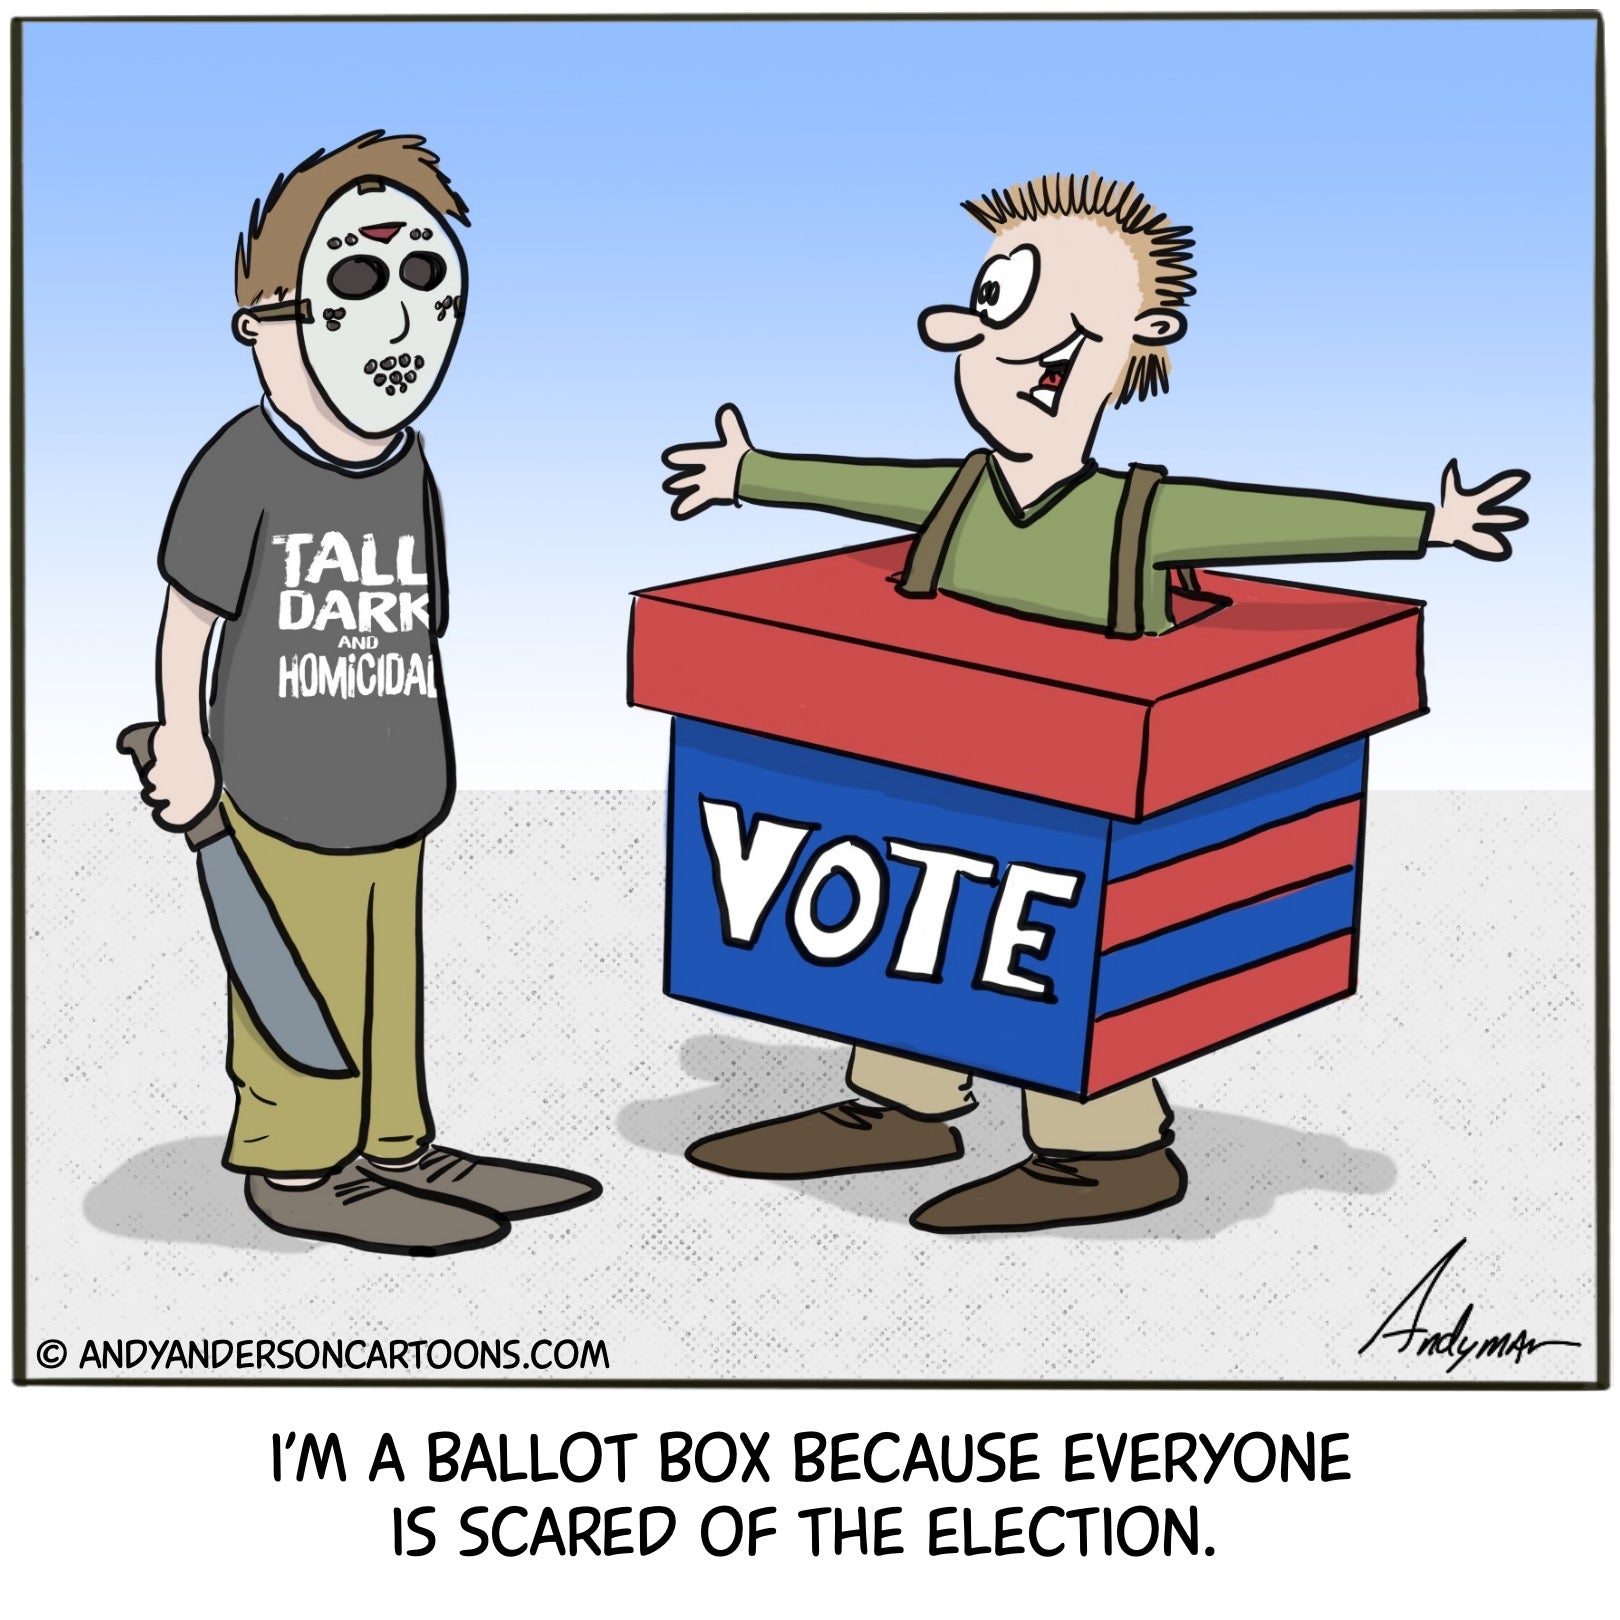 Cartoon about dressing up as a ballot box because people are scared of the election